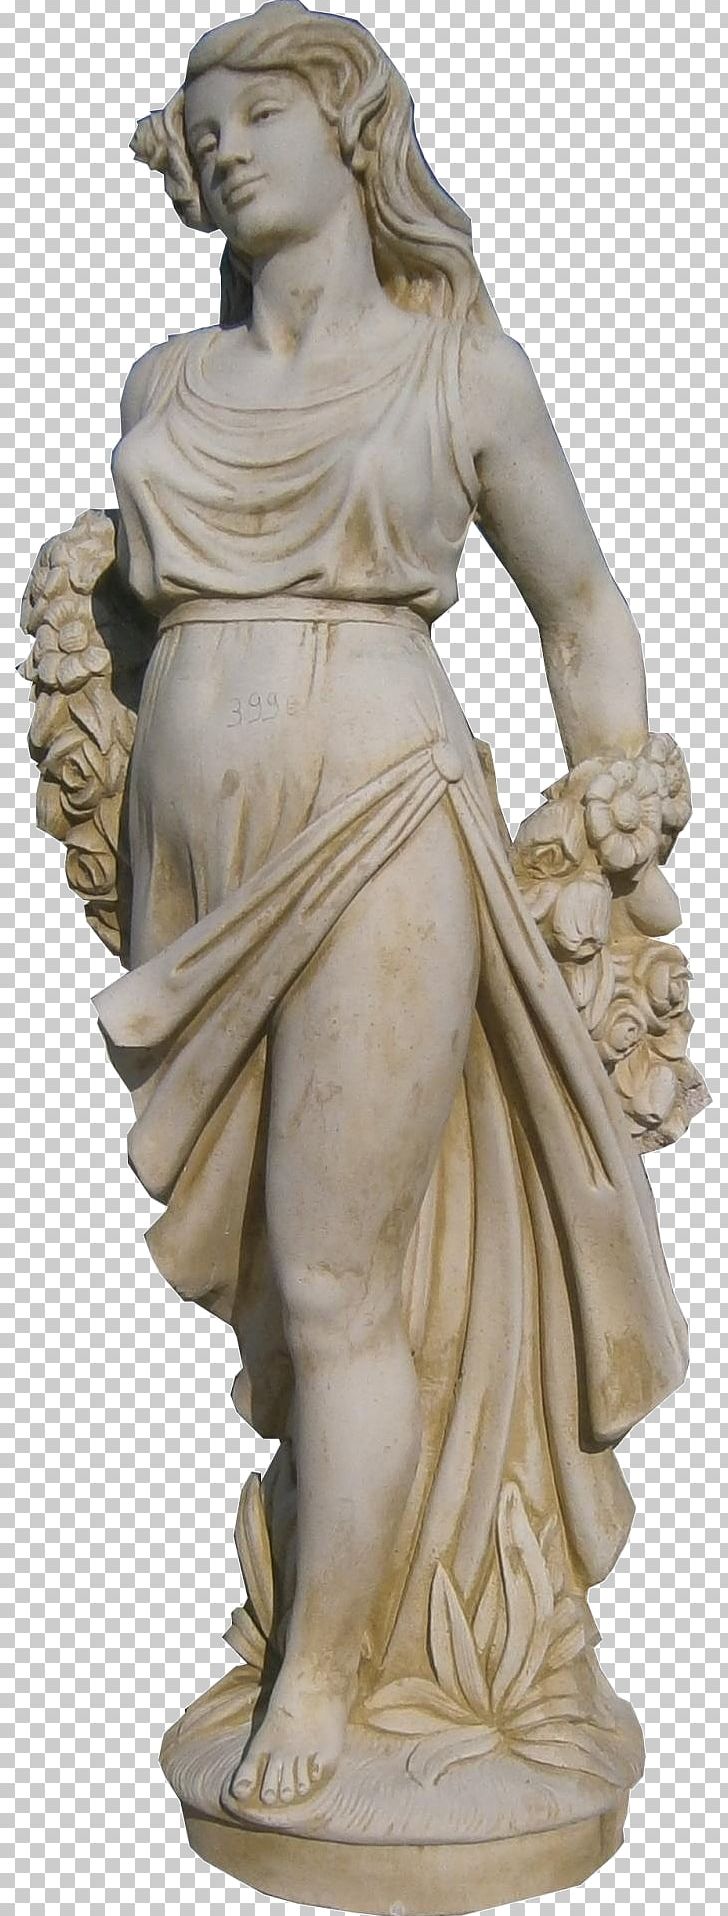 Statue Figurine Classical Sculpture Ancient Greek Sculpture PNG, Clipart, Ancient Greek Sculpture, Artificial Stone, Artwork, Carving, Classical Sculpture Free PNG Download